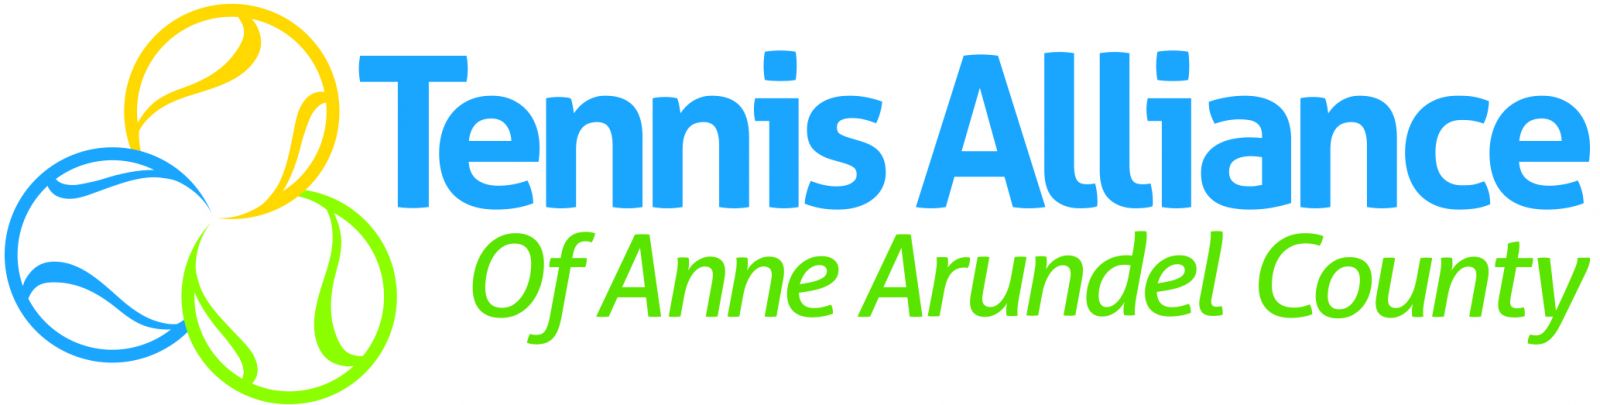 Tennis Alliance of Anne Arundle County